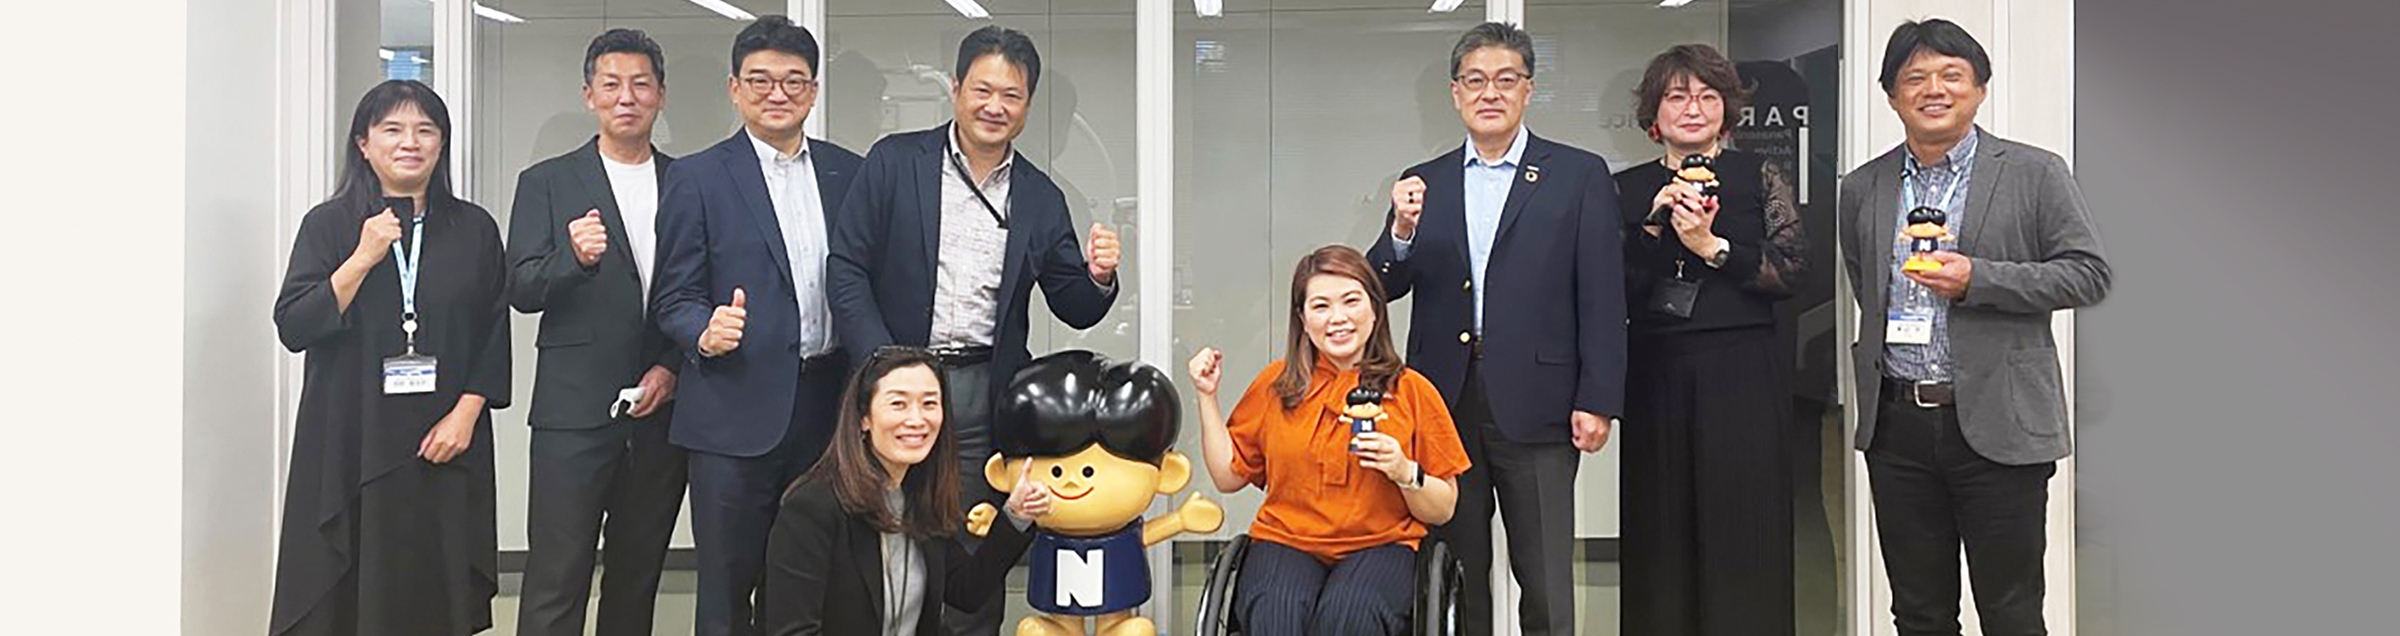 Photo: Eri Yamamoto fist pumping the air with a National Boy doll in her hand, surrounded by workshop participants.